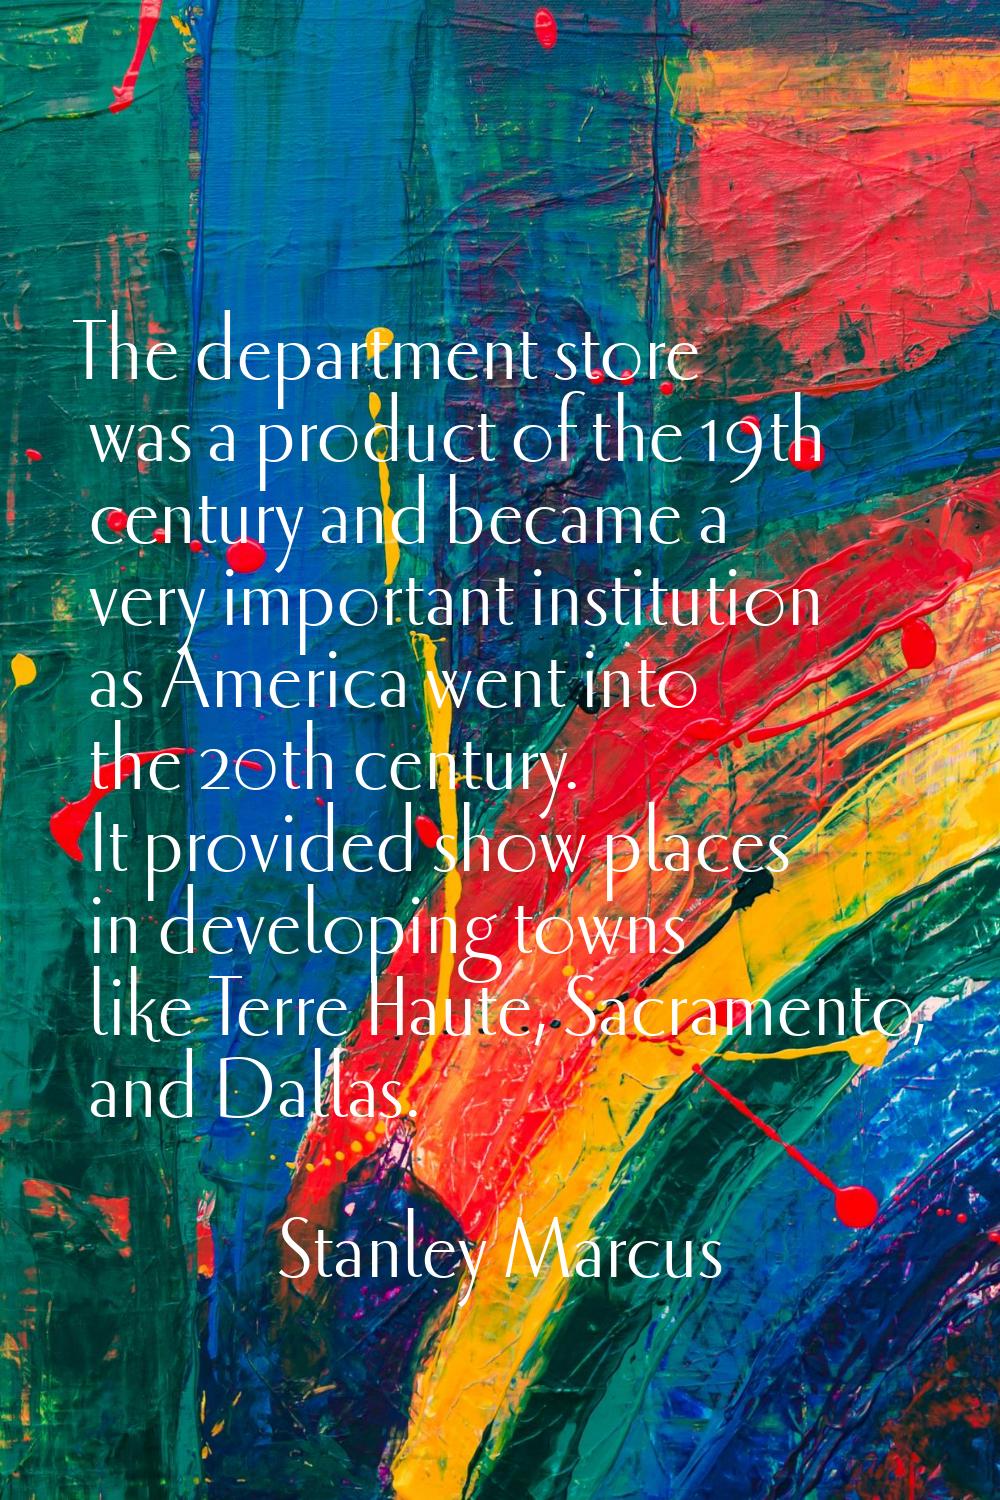 The department store was a product of the 19th century and became a very important institution as A